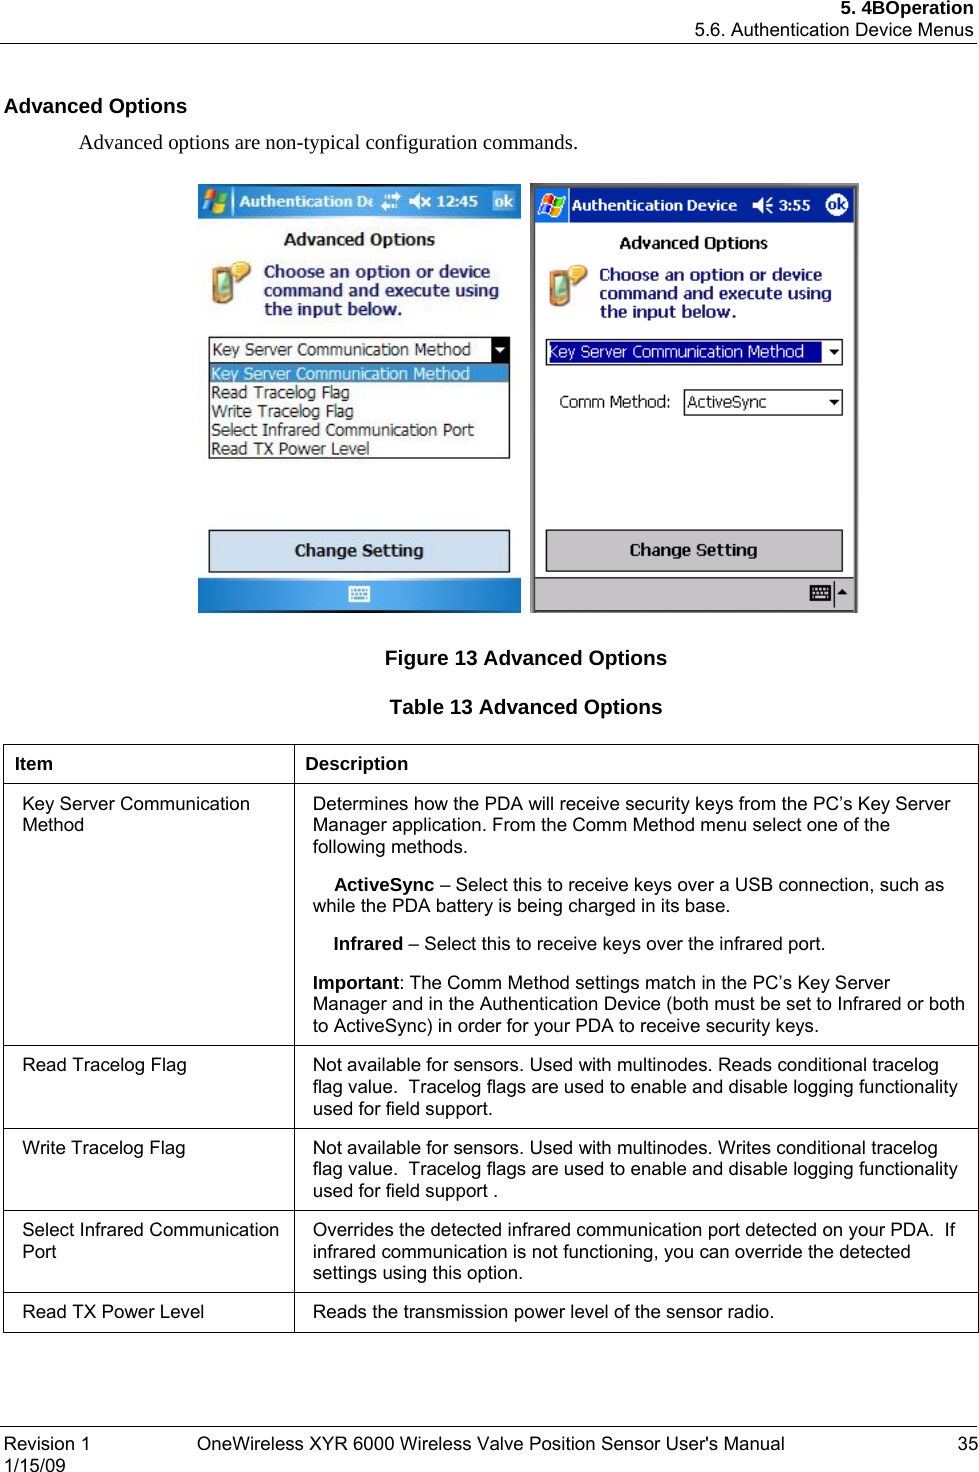 5. 4BOperation 5.6. Authentication Device Menus Advanced Options Advanced options are non-typical configuration commands.          Figure 13 Advanced Options Table 13 Advanced Options  Item Description Key Server Communication Method Determines how the PDA will receive security keys from the PC’s Key Server Manager application. From the Comm Method menu select one of the following methods.     ActiveSync – Select this to receive keys over a USB connection, such as while the PDA battery is being charged in its base.     Infrared – Select this to receive keys over the infrared port. Important: The Comm Method settings match in the PC’s Key Server Manager and in the Authentication Device (both must be set to Infrared or both to ActiveSync) in order for your PDA to receive security keys.  Read Tracelog Flag  Not available for sensors. Used with multinodes. Reads conditional tracelog flag value.  Tracelog flags are used to enable and disable logging functionality used for field support. Write Tracelog Flag  Not available for sensors. Used with multinodes. Writes conditional tracelog flag value.  Tracelog flags are used to enable and disable logging functionality used for field support . Select Infrared Communication Port Overrides the detected infrared communication port detected on your PDA.  If infrared communication is not functioning, you can override the detected settings using this option. Read TX Power Level  Reads the transmission power level of the sensor radio.   Revision 1  OneWireless XYR 6000 Wireless Valve Position Sensor User&apos;s Manual  35 1/15/09  